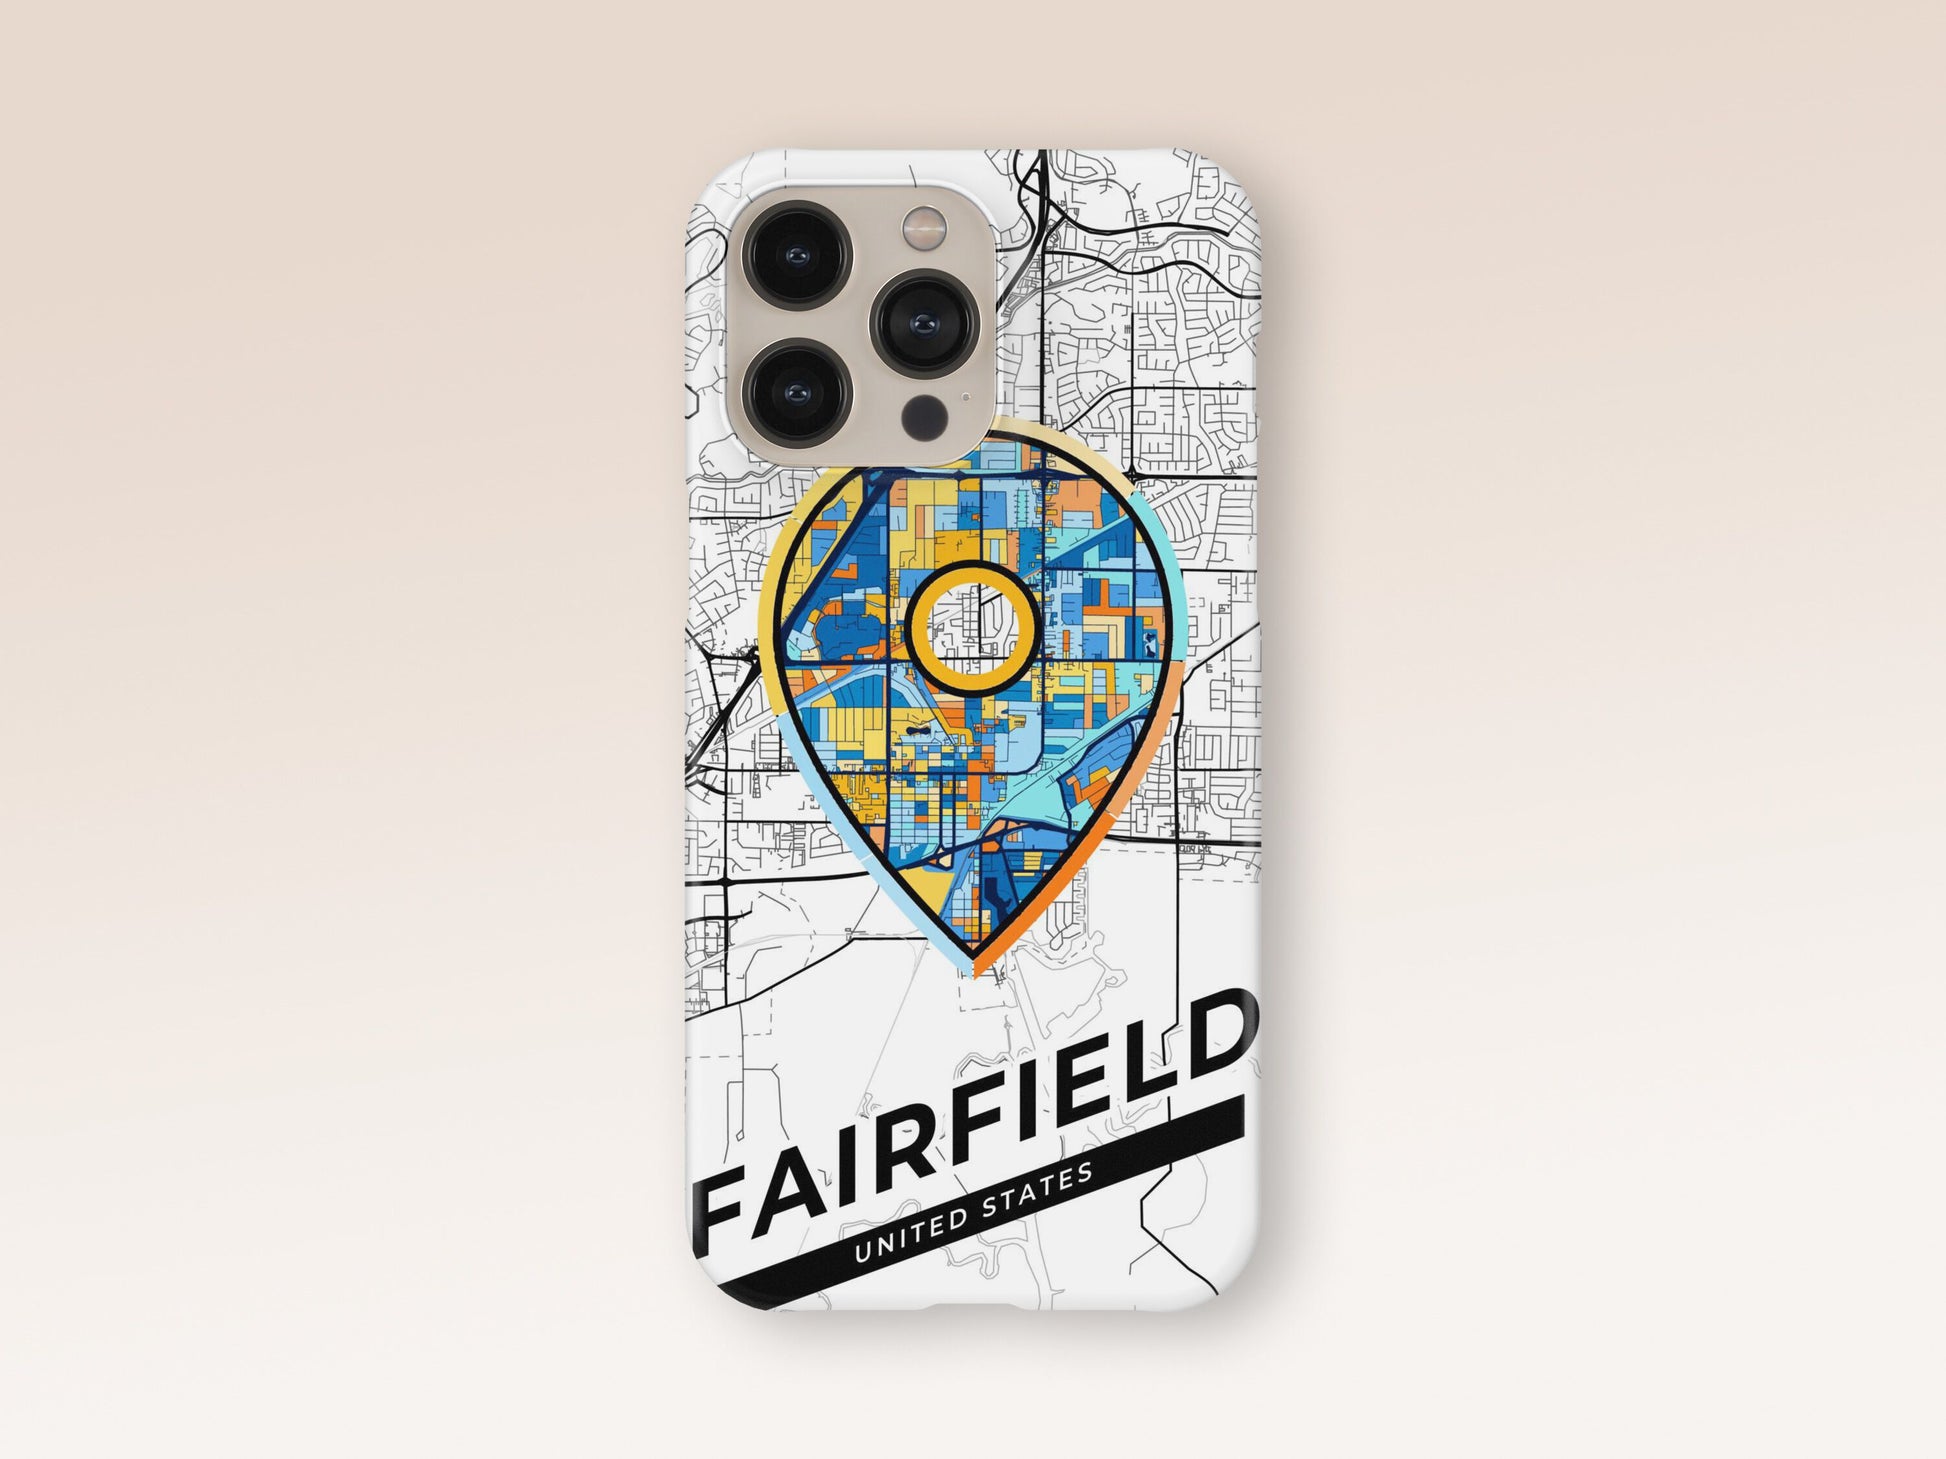 Fairfield California slim phone case with colorful icon. Birthday, wedding or housewarming gift. Couple match cases. 1